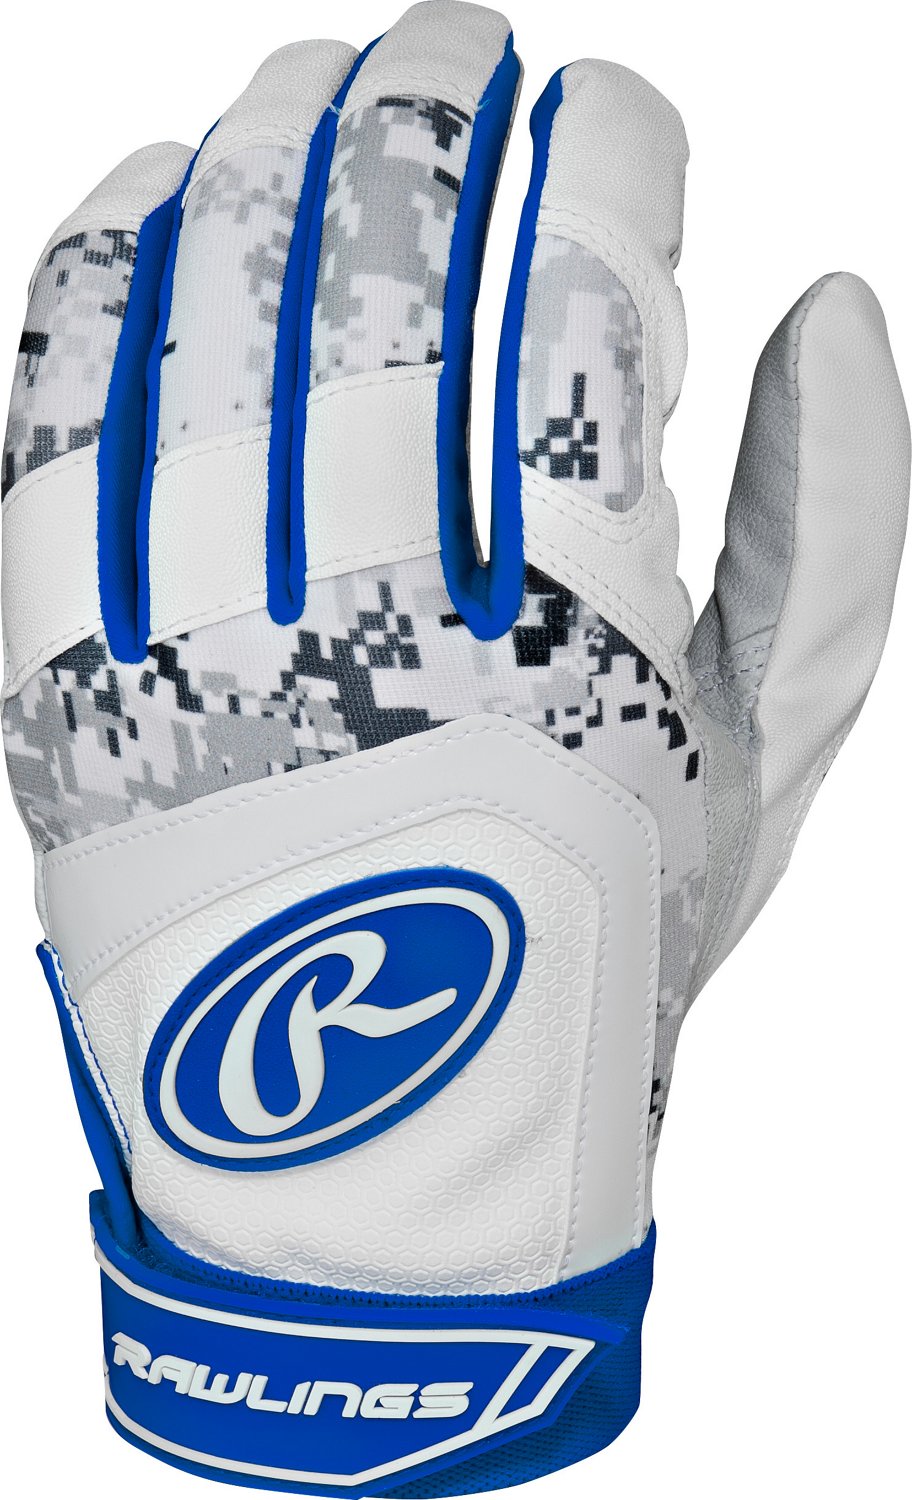 captain america youth football gloves